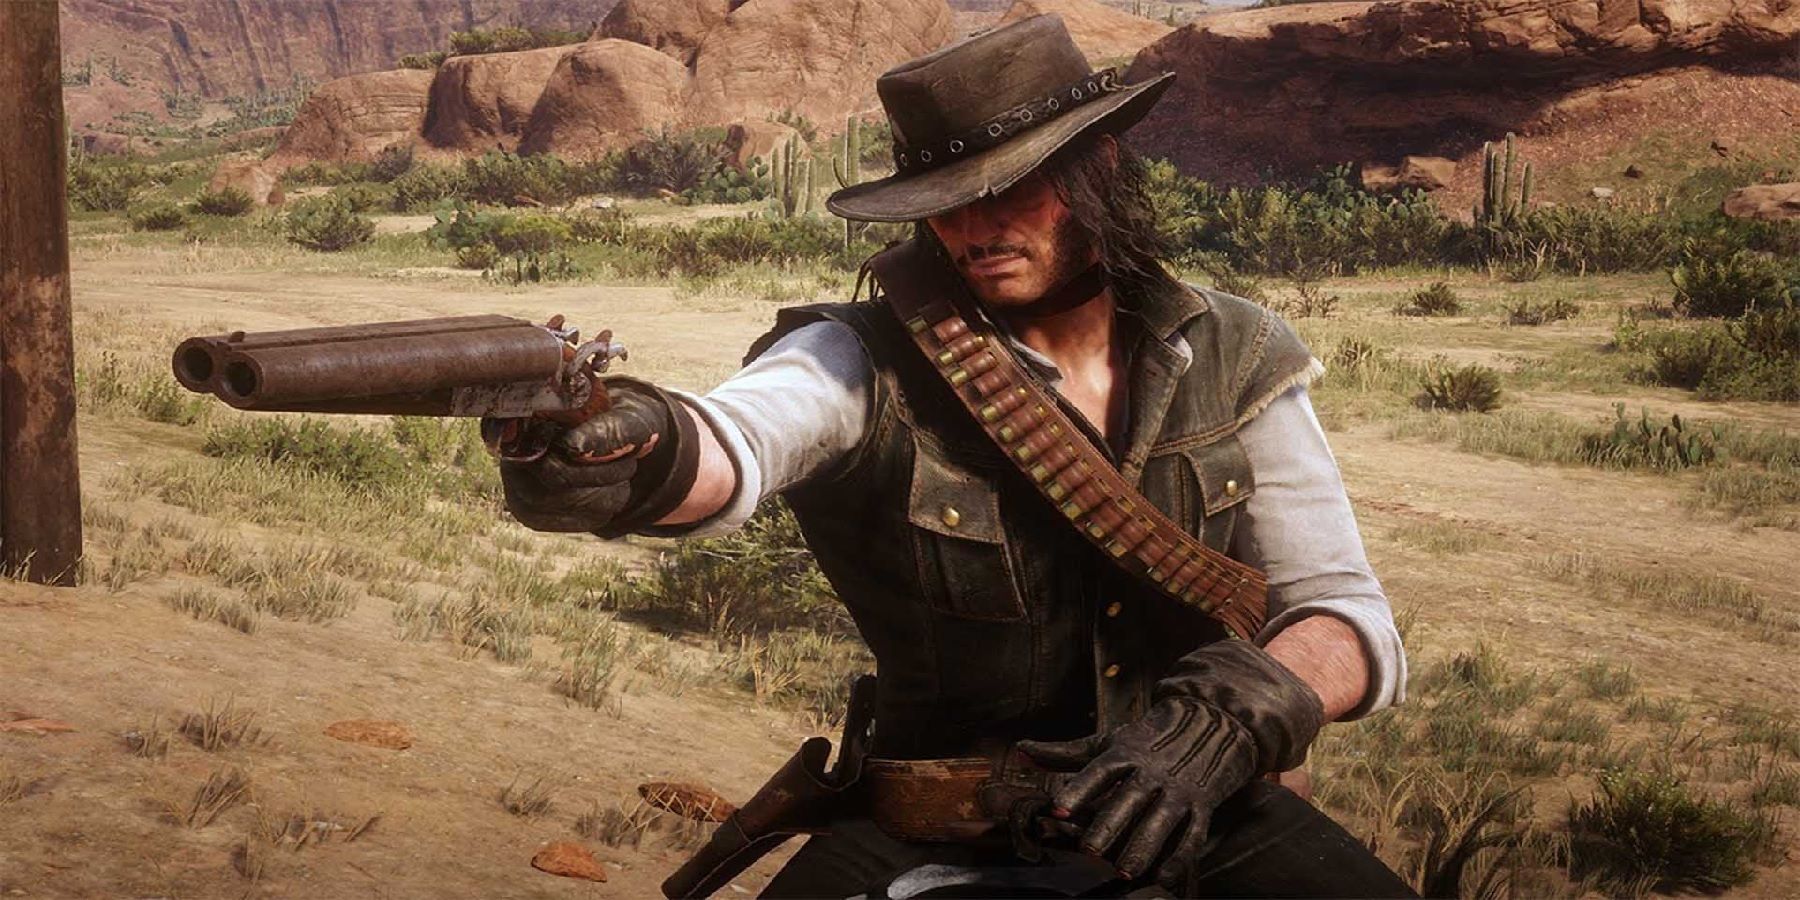 How to Play Red Dead Redemption on PC: A Streaming Solution